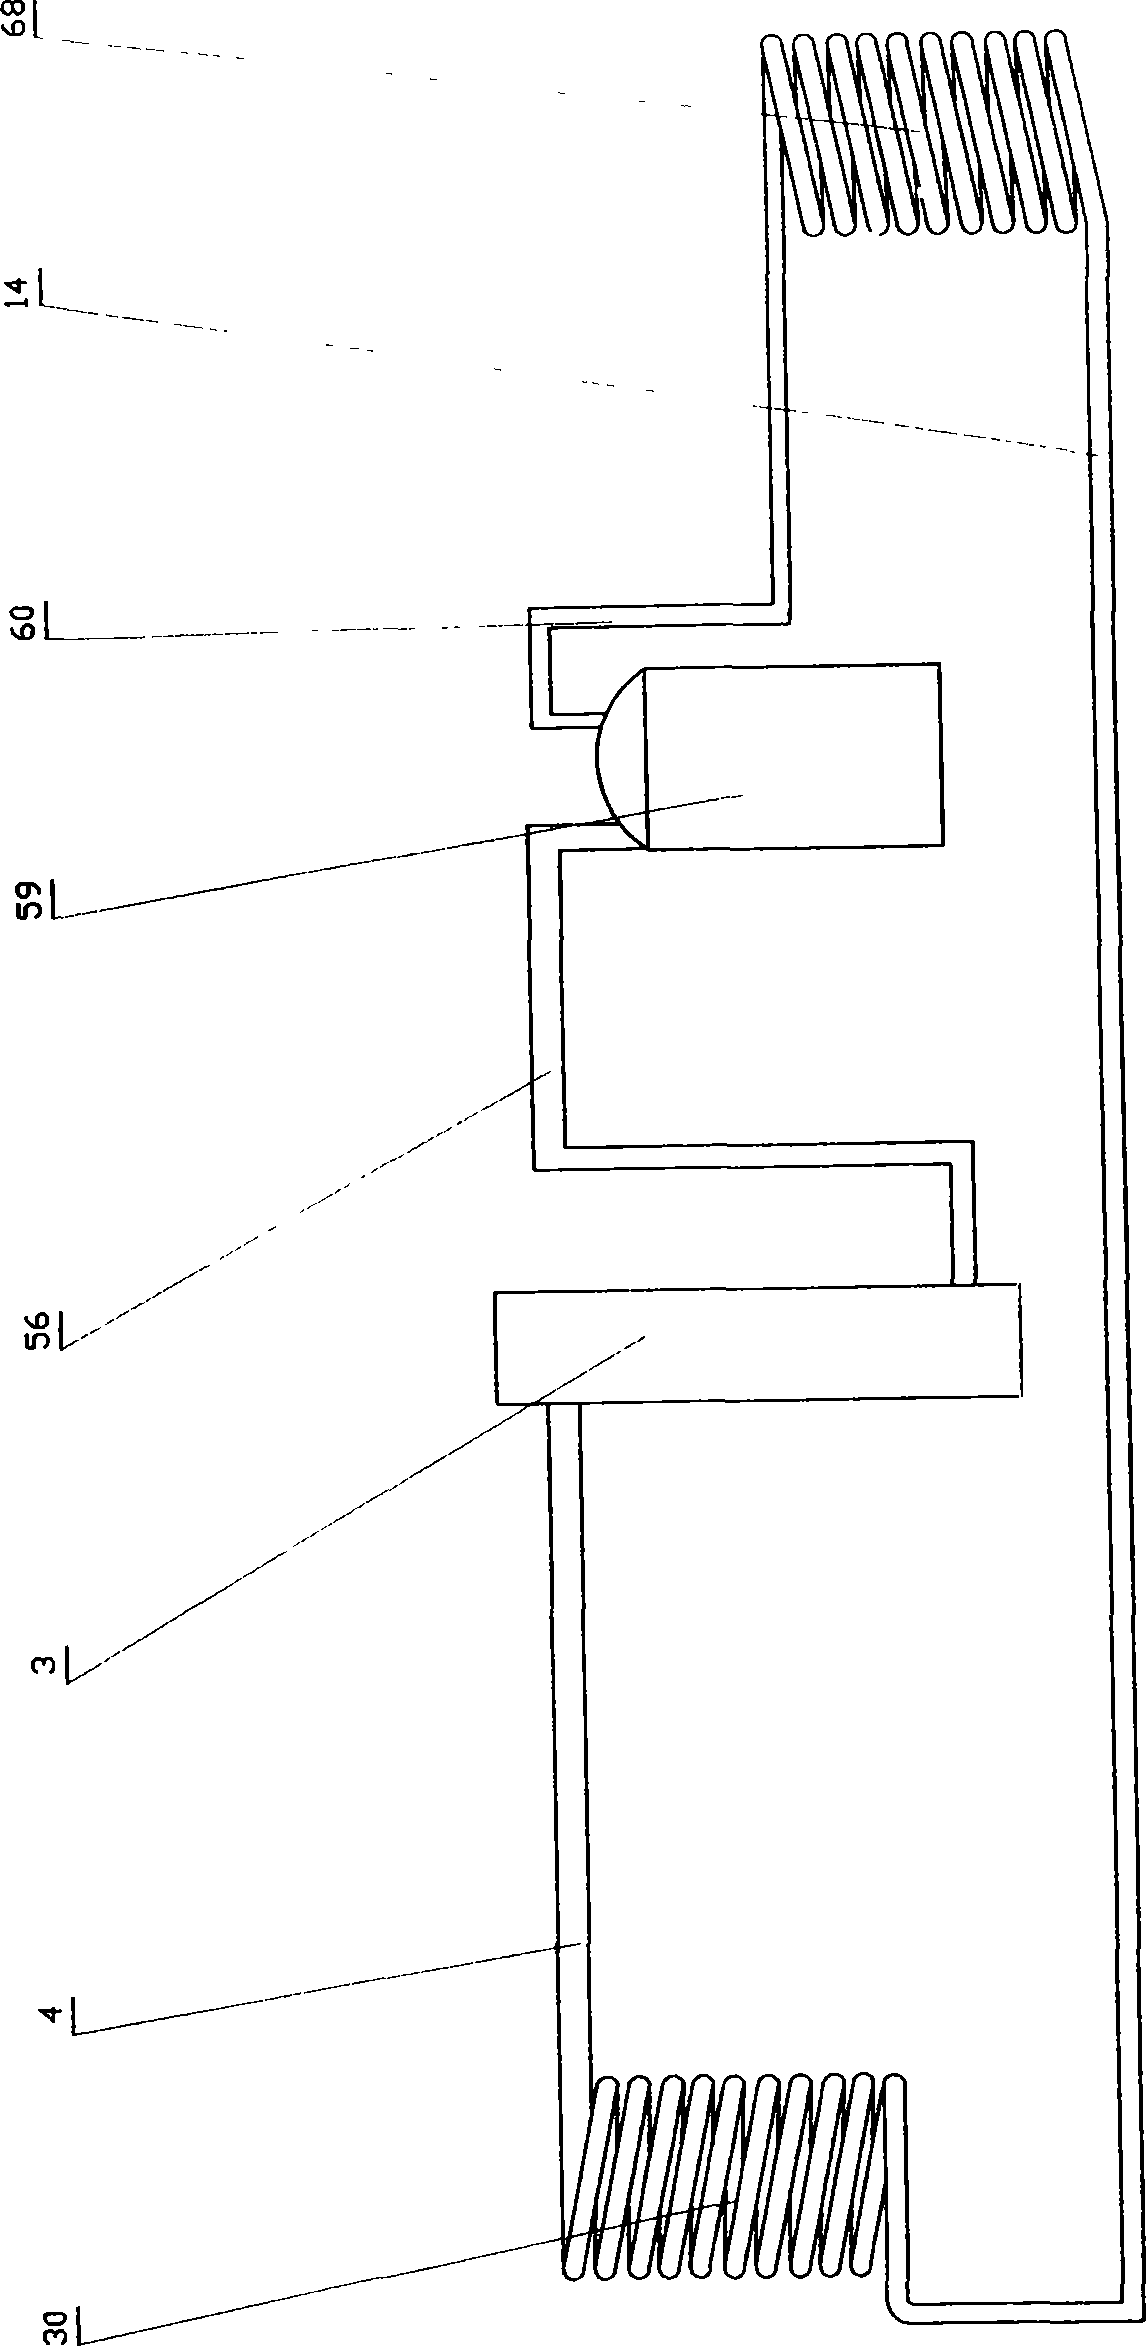 Process method for digesting plant oil by using carbon dioxide